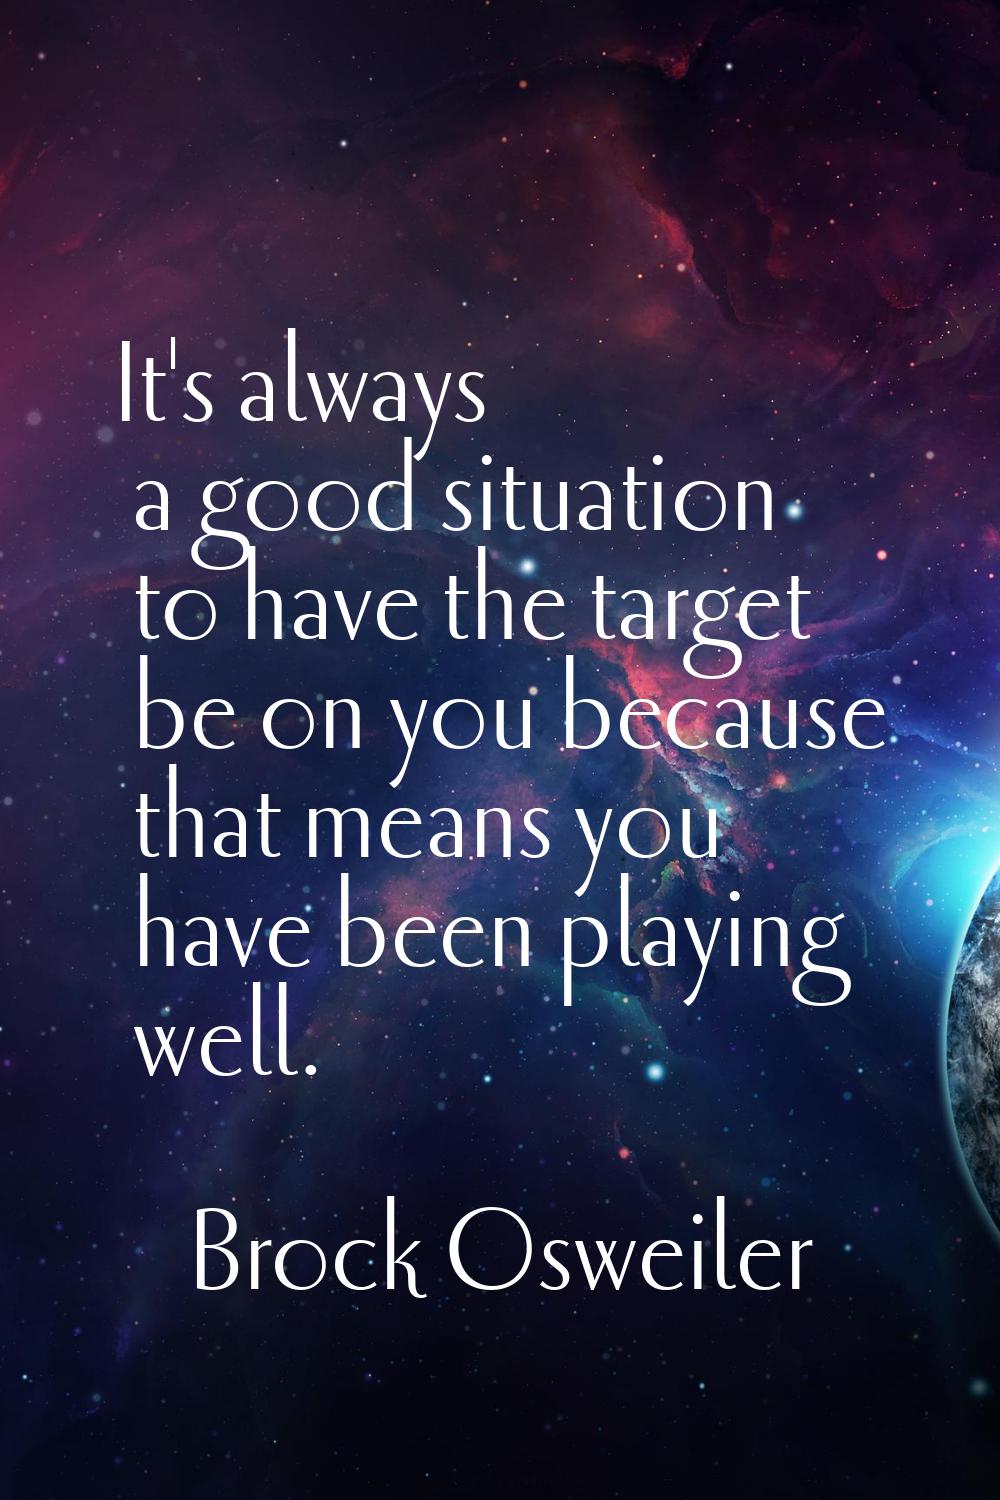 It's always a good situation to have the target be on you because that means you have been playing 